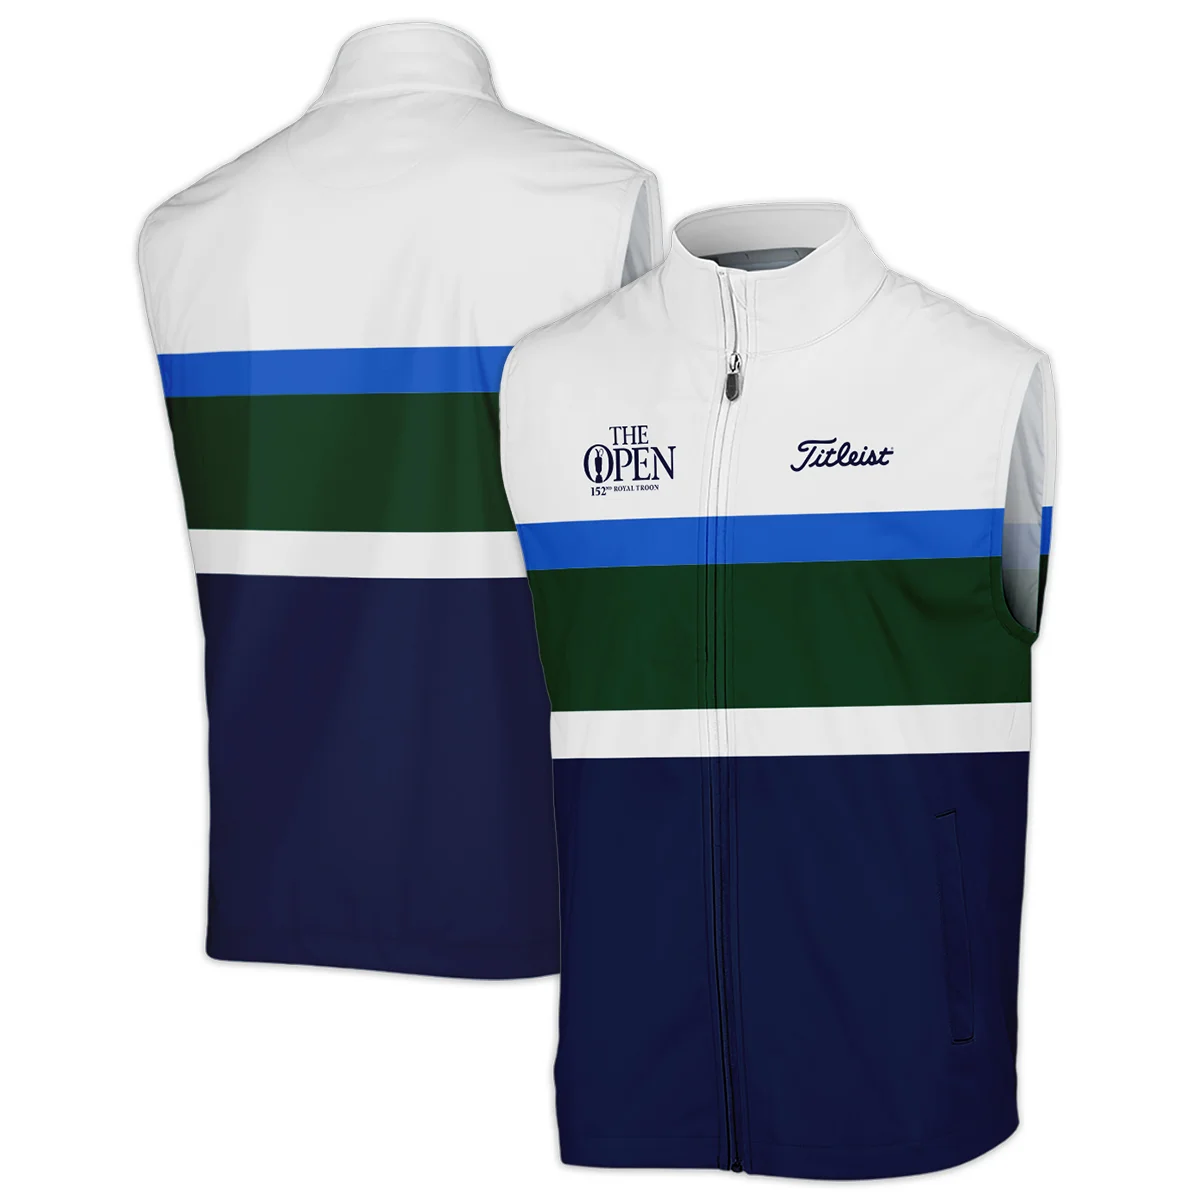 White Blue Green Background Titleist 152nd Open Championship Sleeveless Jacket All Over Prints HOTOP270624A01TLSJK